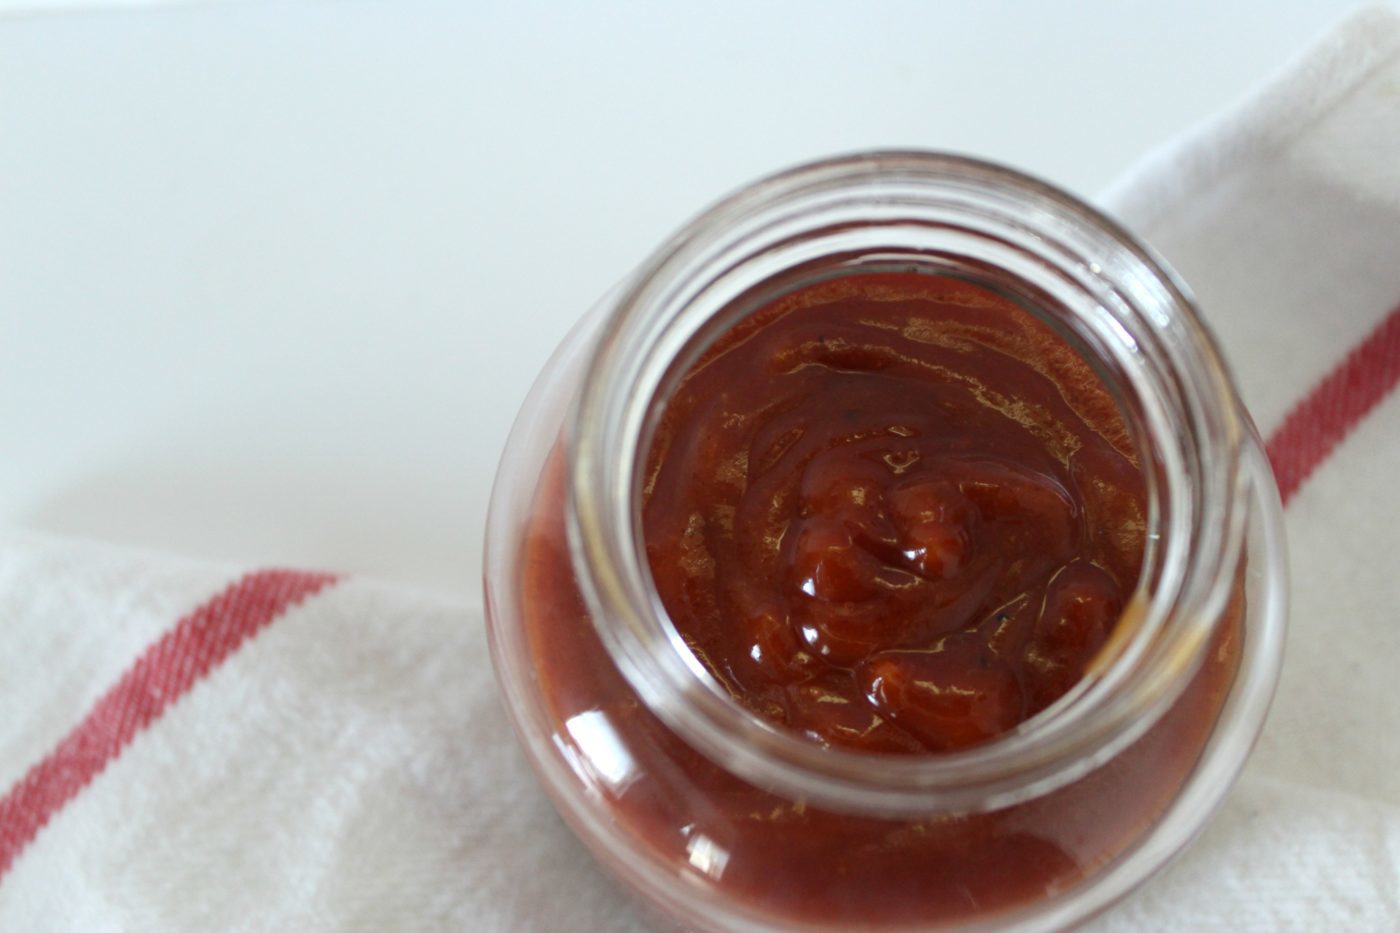 You can baste this sauce on chicken or slather it on a delicious burger.